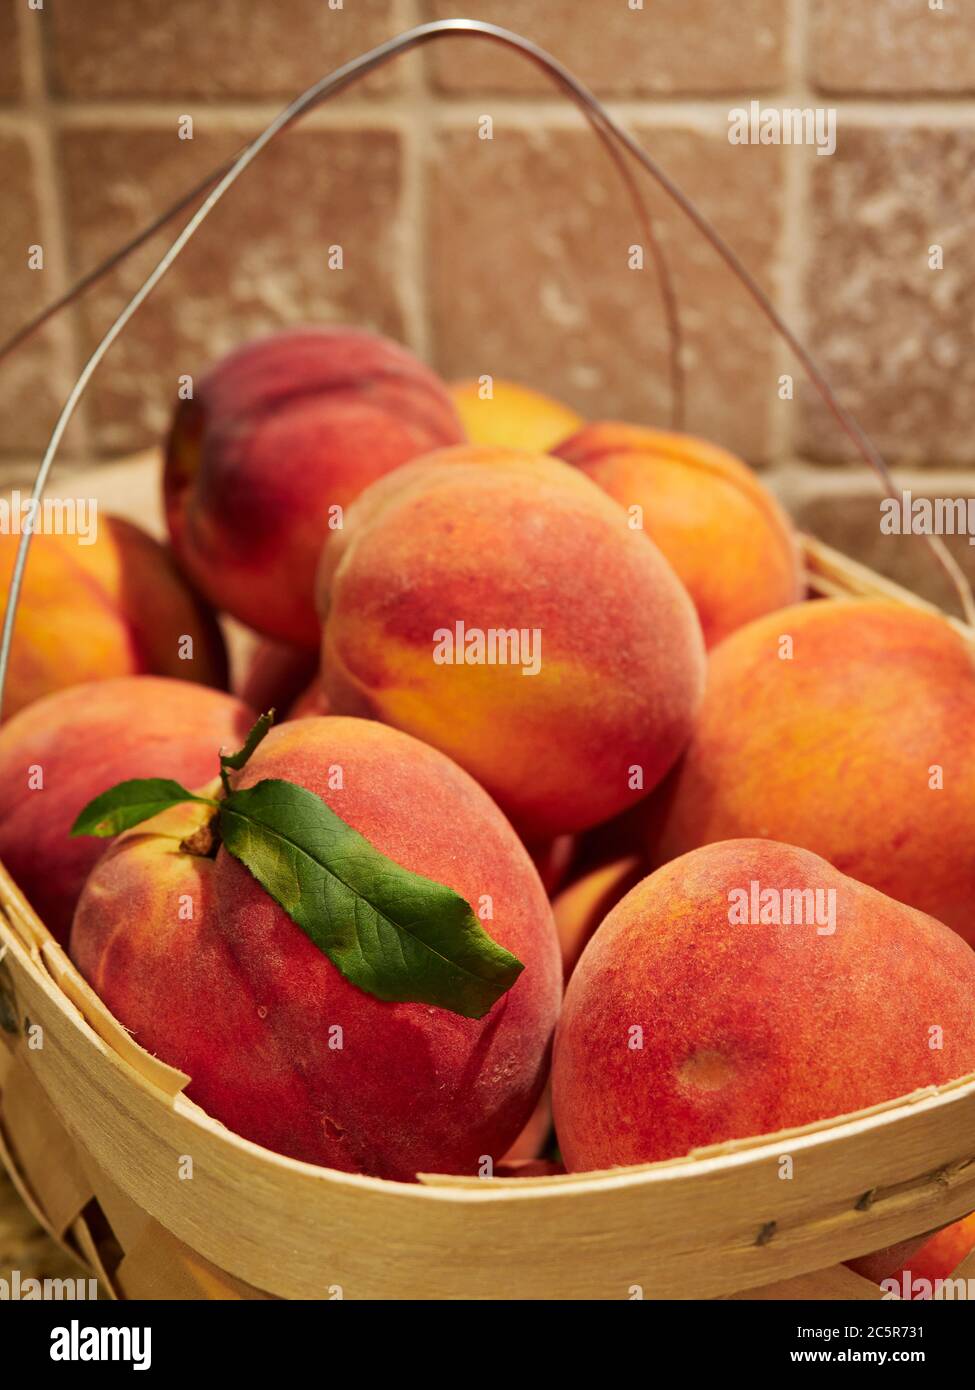 Fresh, ripe cling free peaches a summer fruit in a basket on a kitchen countertop. Stock Photo